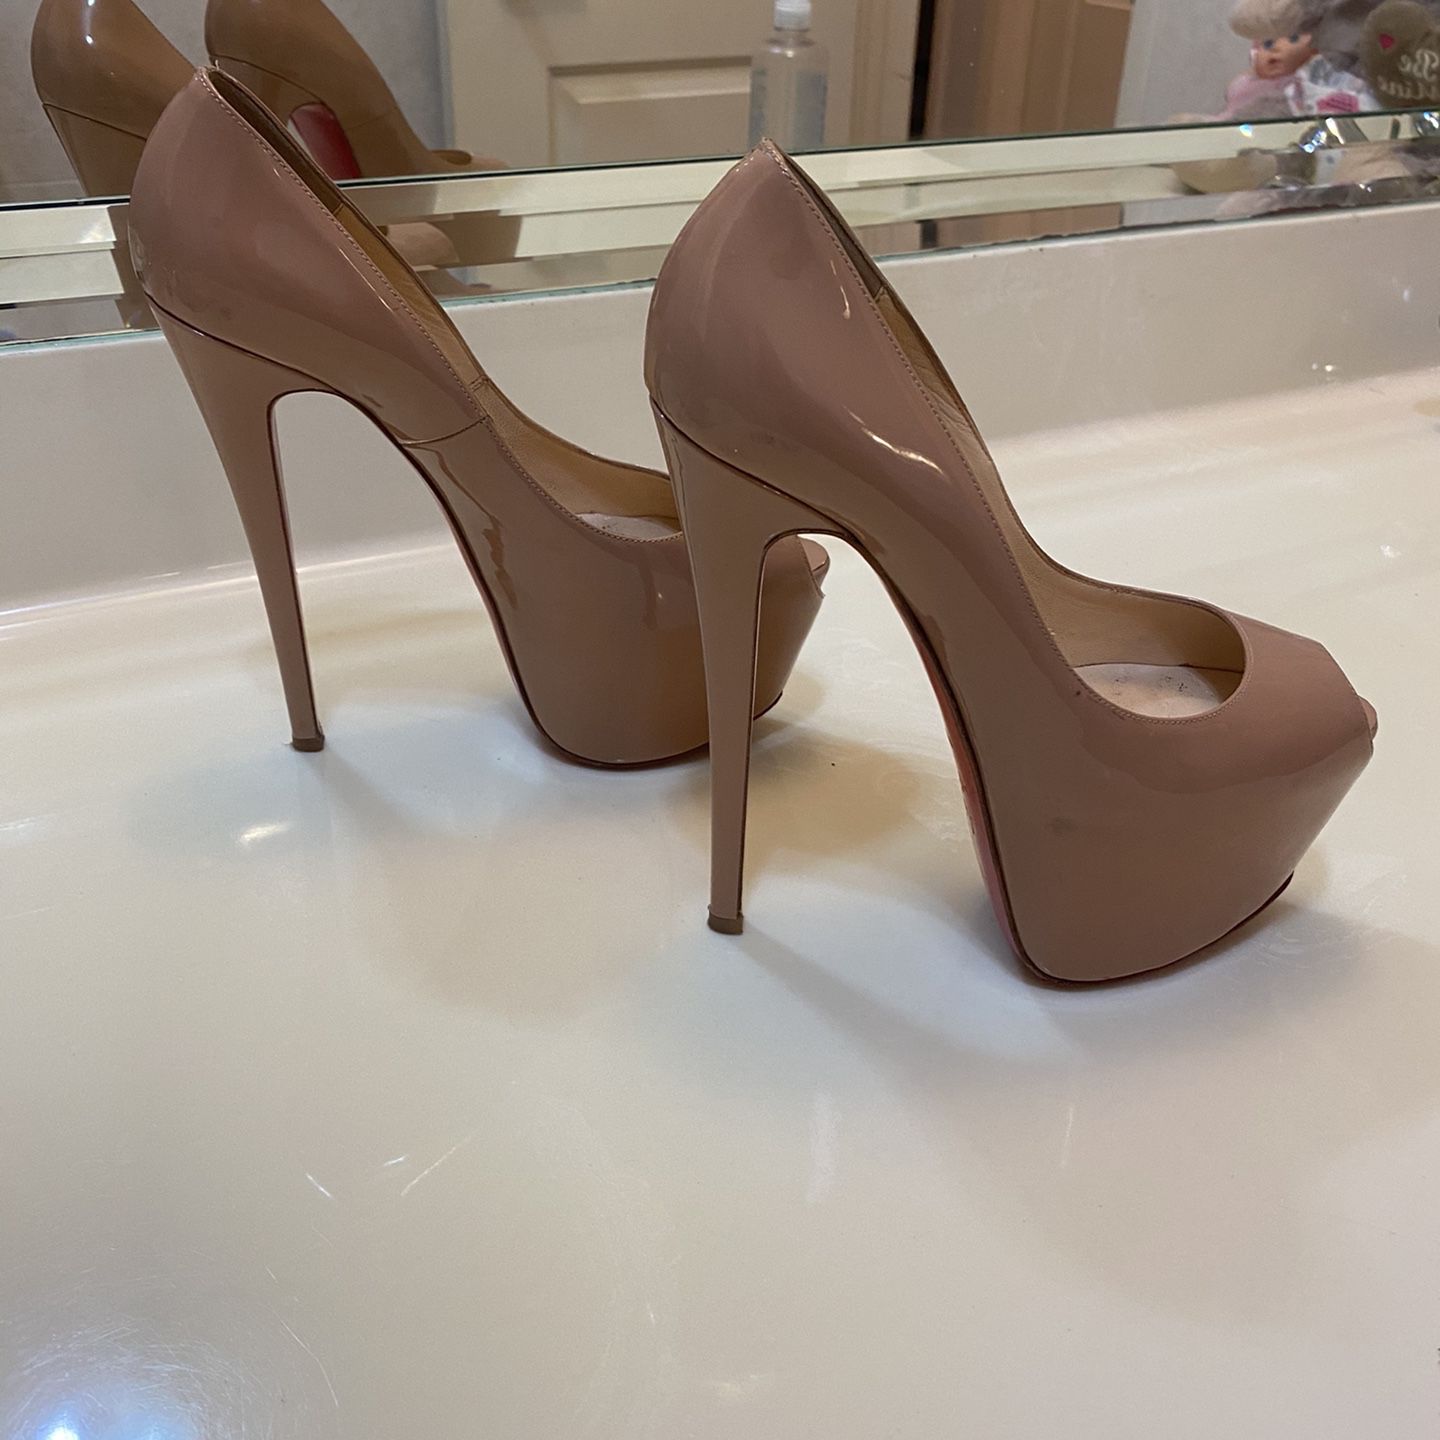 christian lv red bottom heels for Sale in Miami Beach, FL - OfferUp